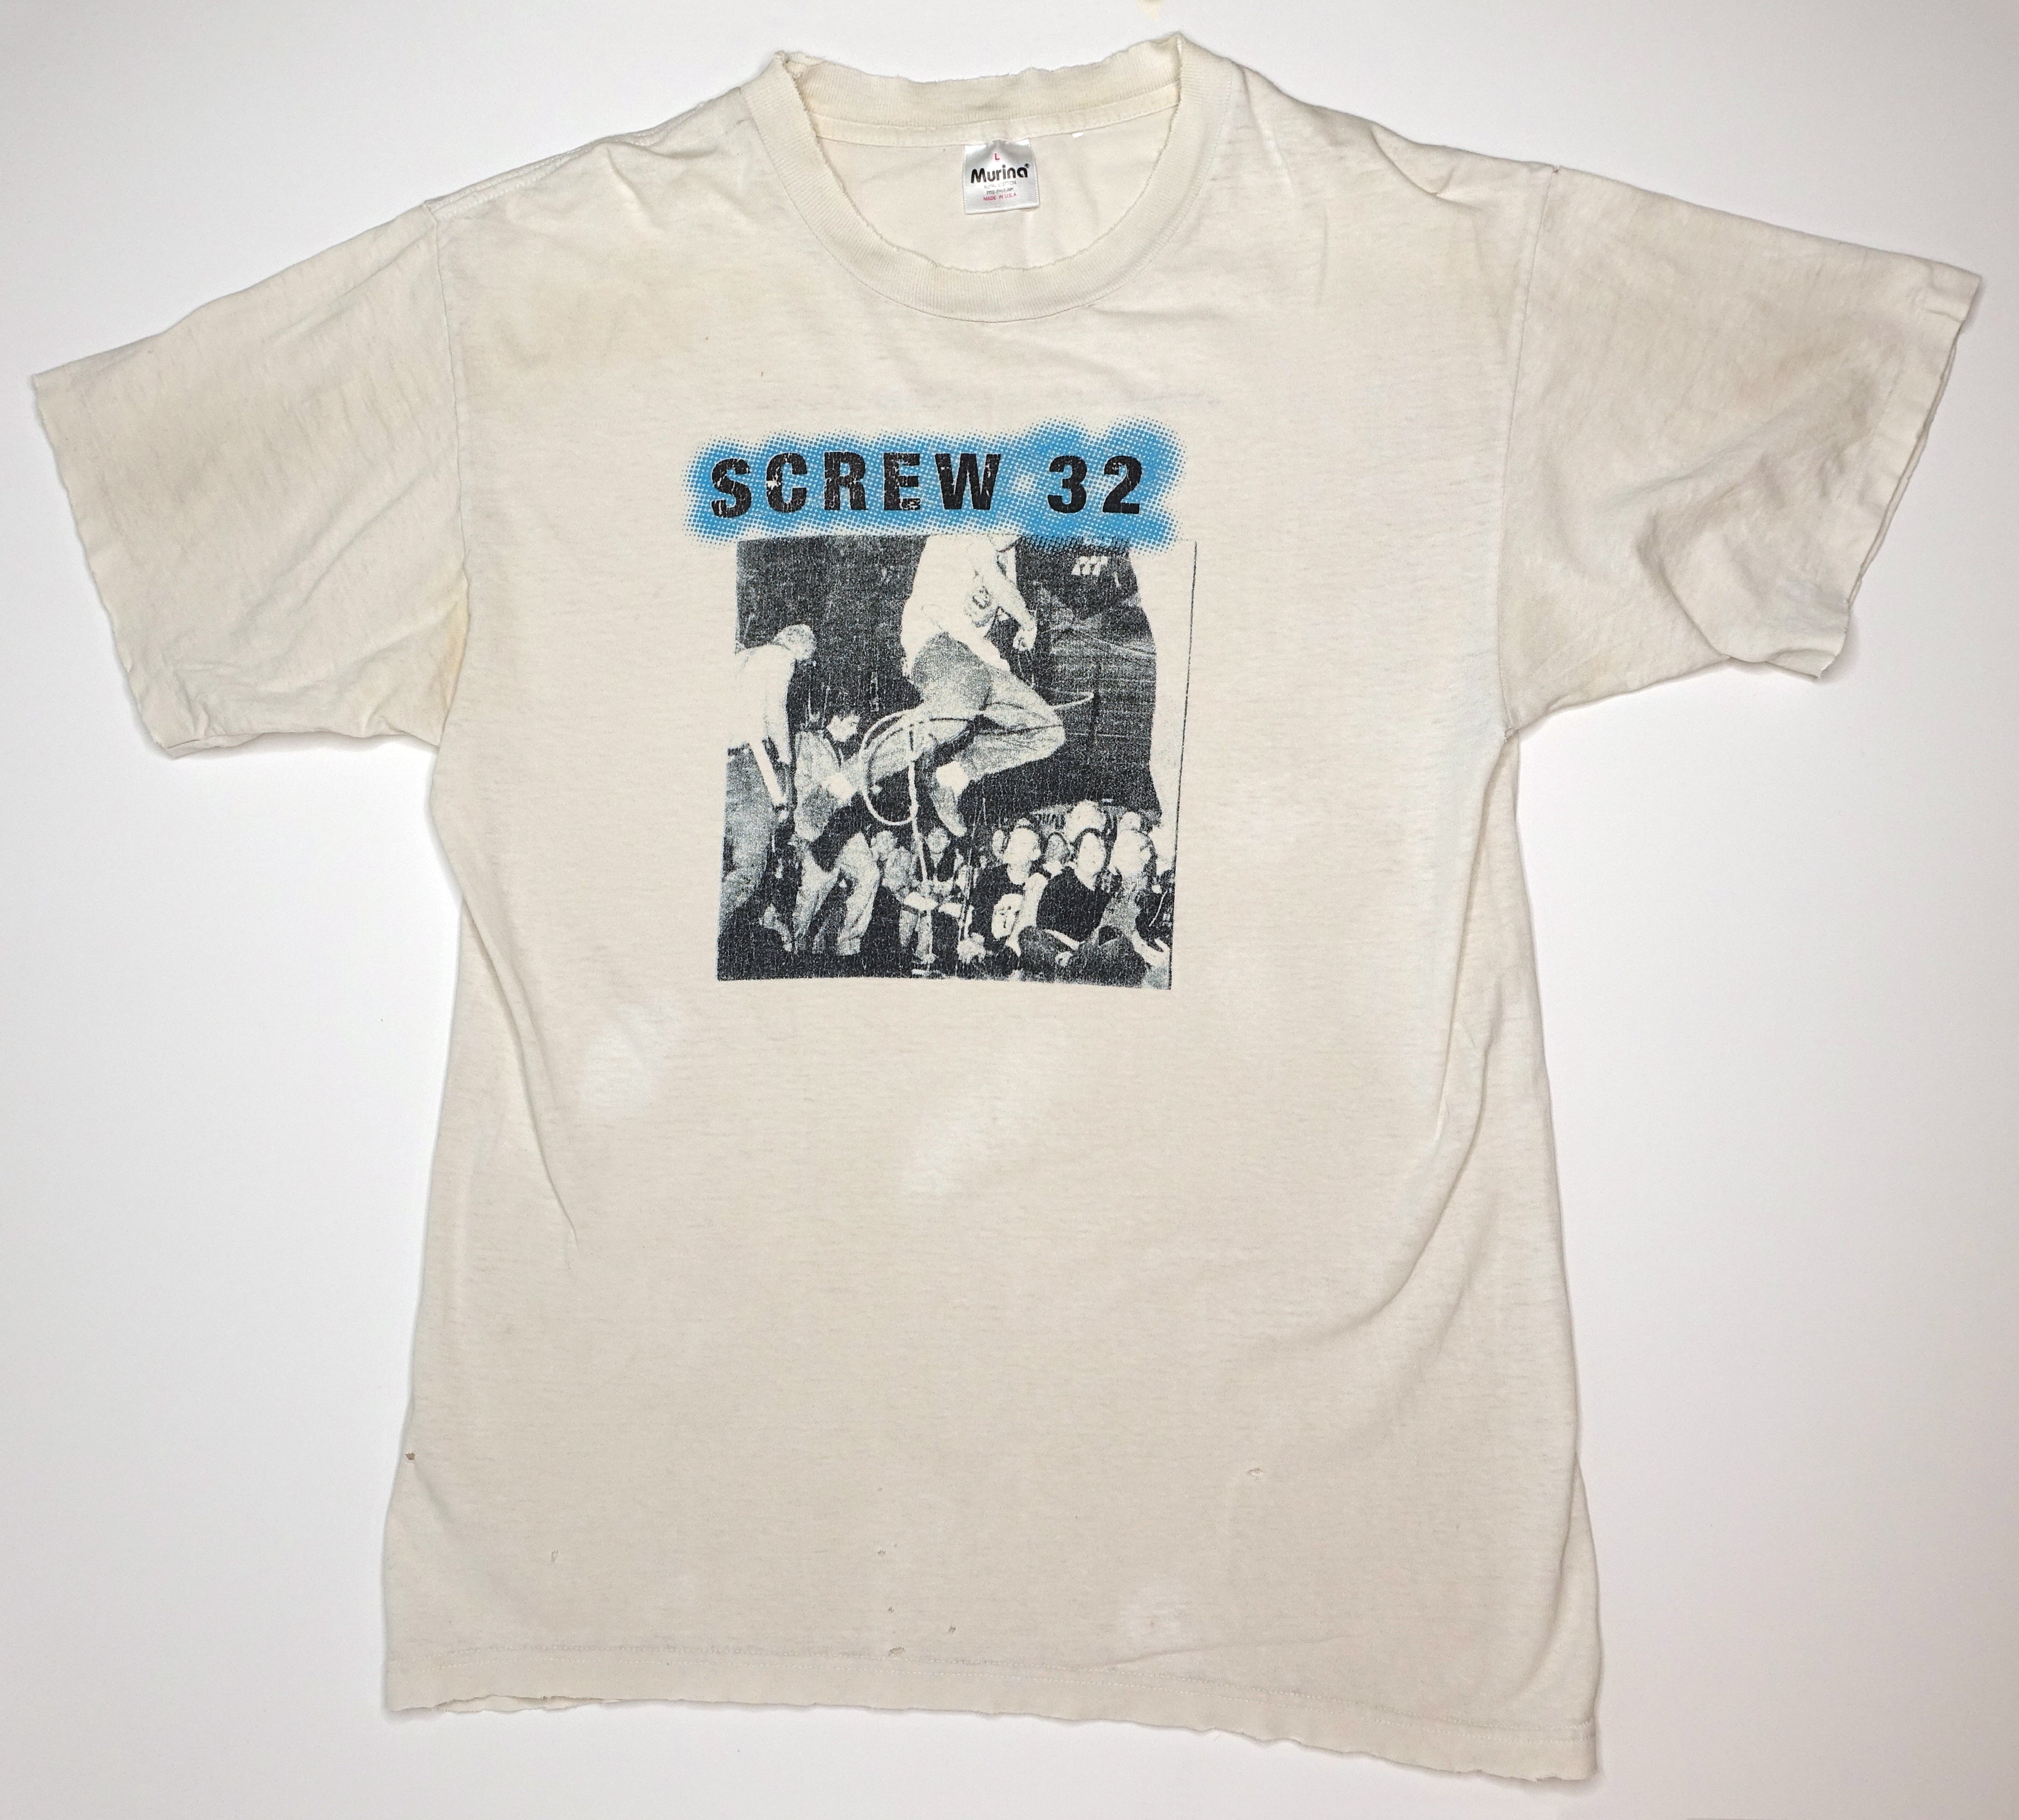 Screw 32 ‎– Unresolved Childhood Issues 1995 Tour Shirt Size Large